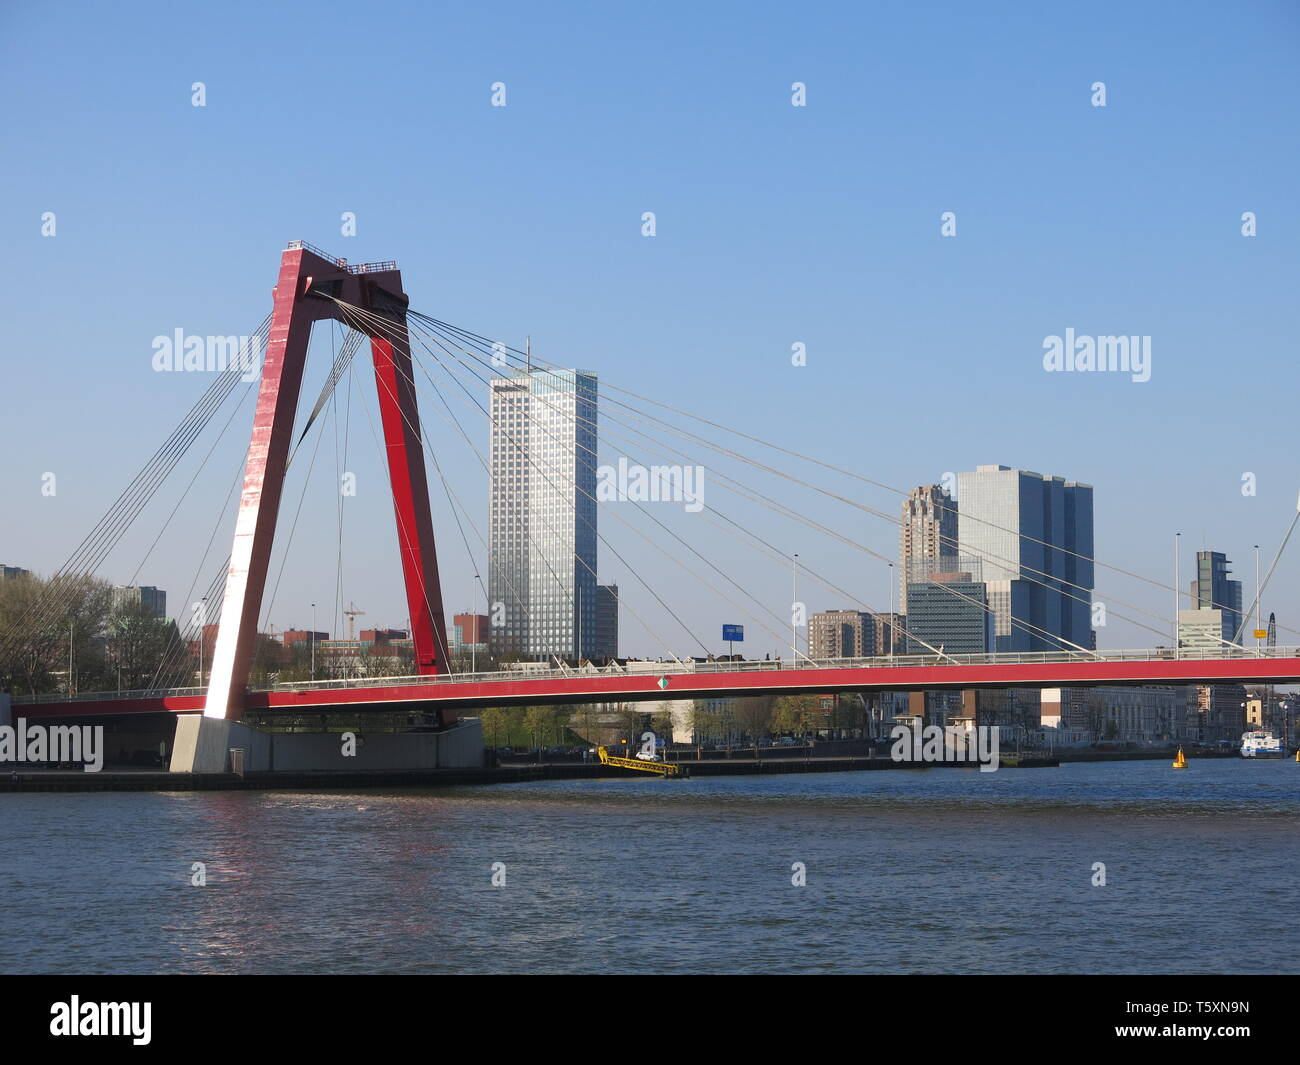 Taken from midway across the Nieuwe Maas, a view of the bright red Willemsbrug bridge and the city of Rotterdam in the background Stock Photo